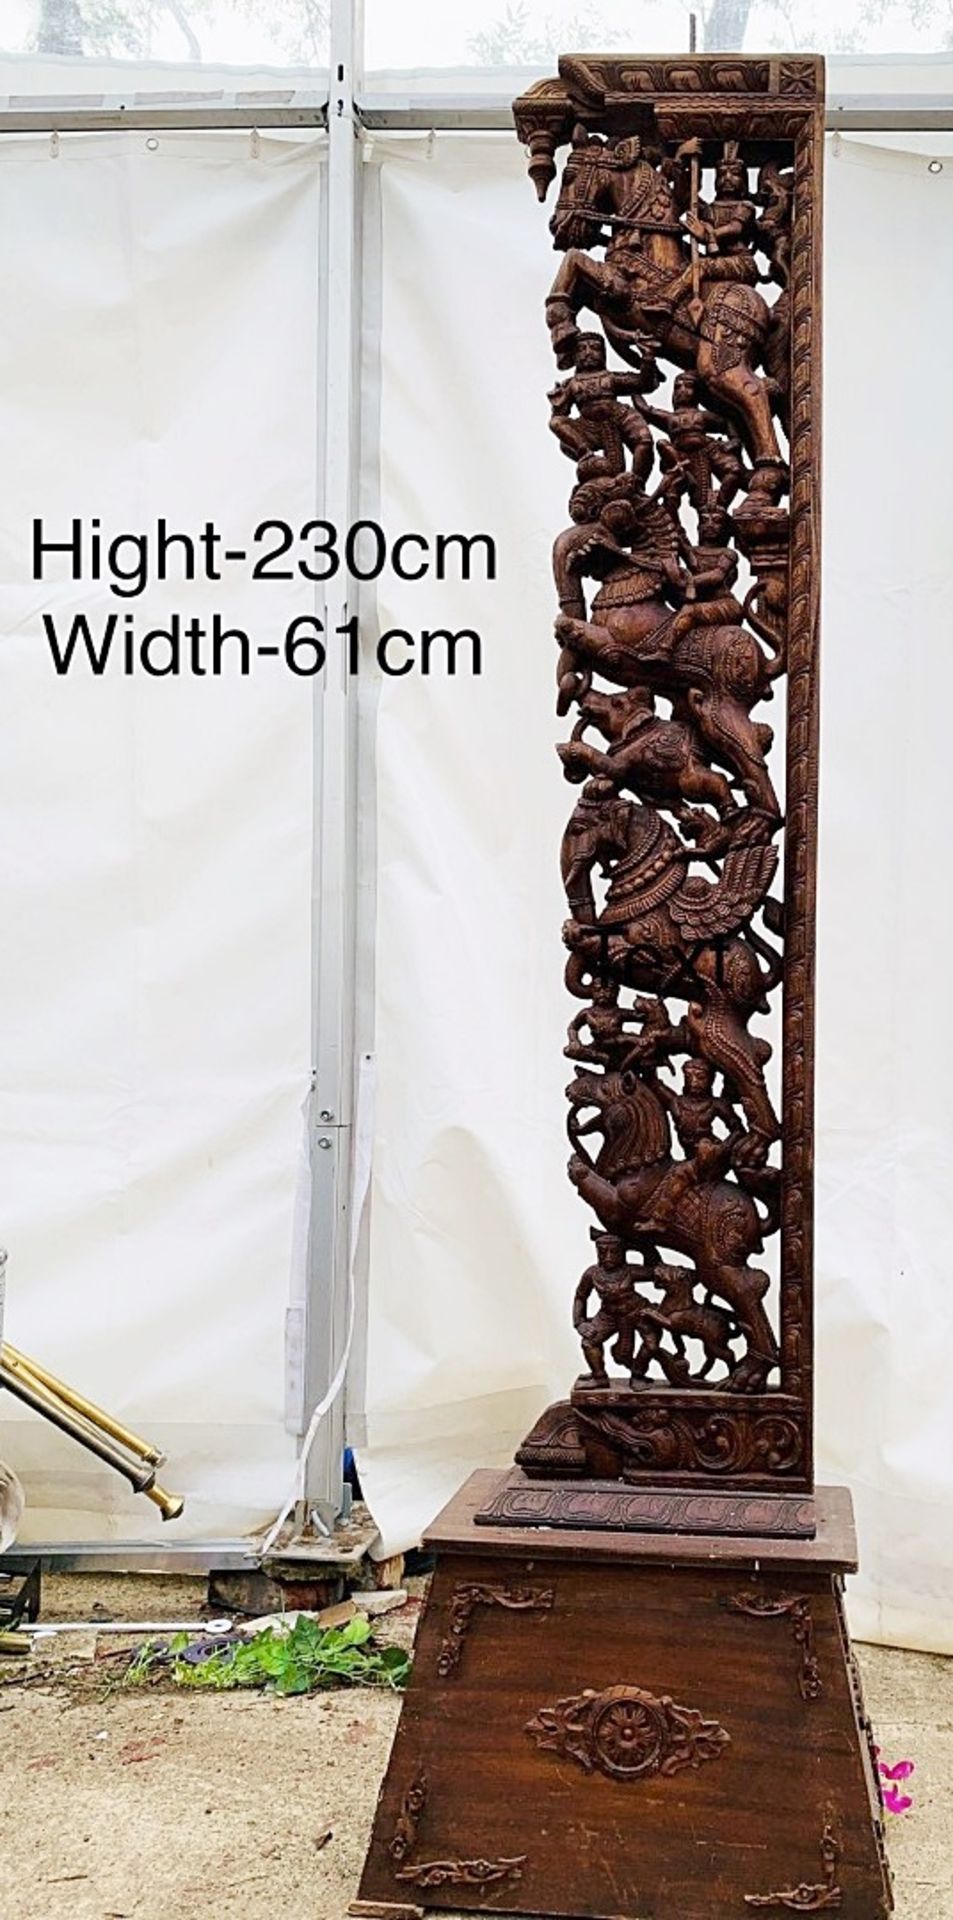 2 x Antique 8ft Genuine Wooden Carved Rajasthani Pillars - Dimensions: H230cm x W61cm - Image 4 of 4